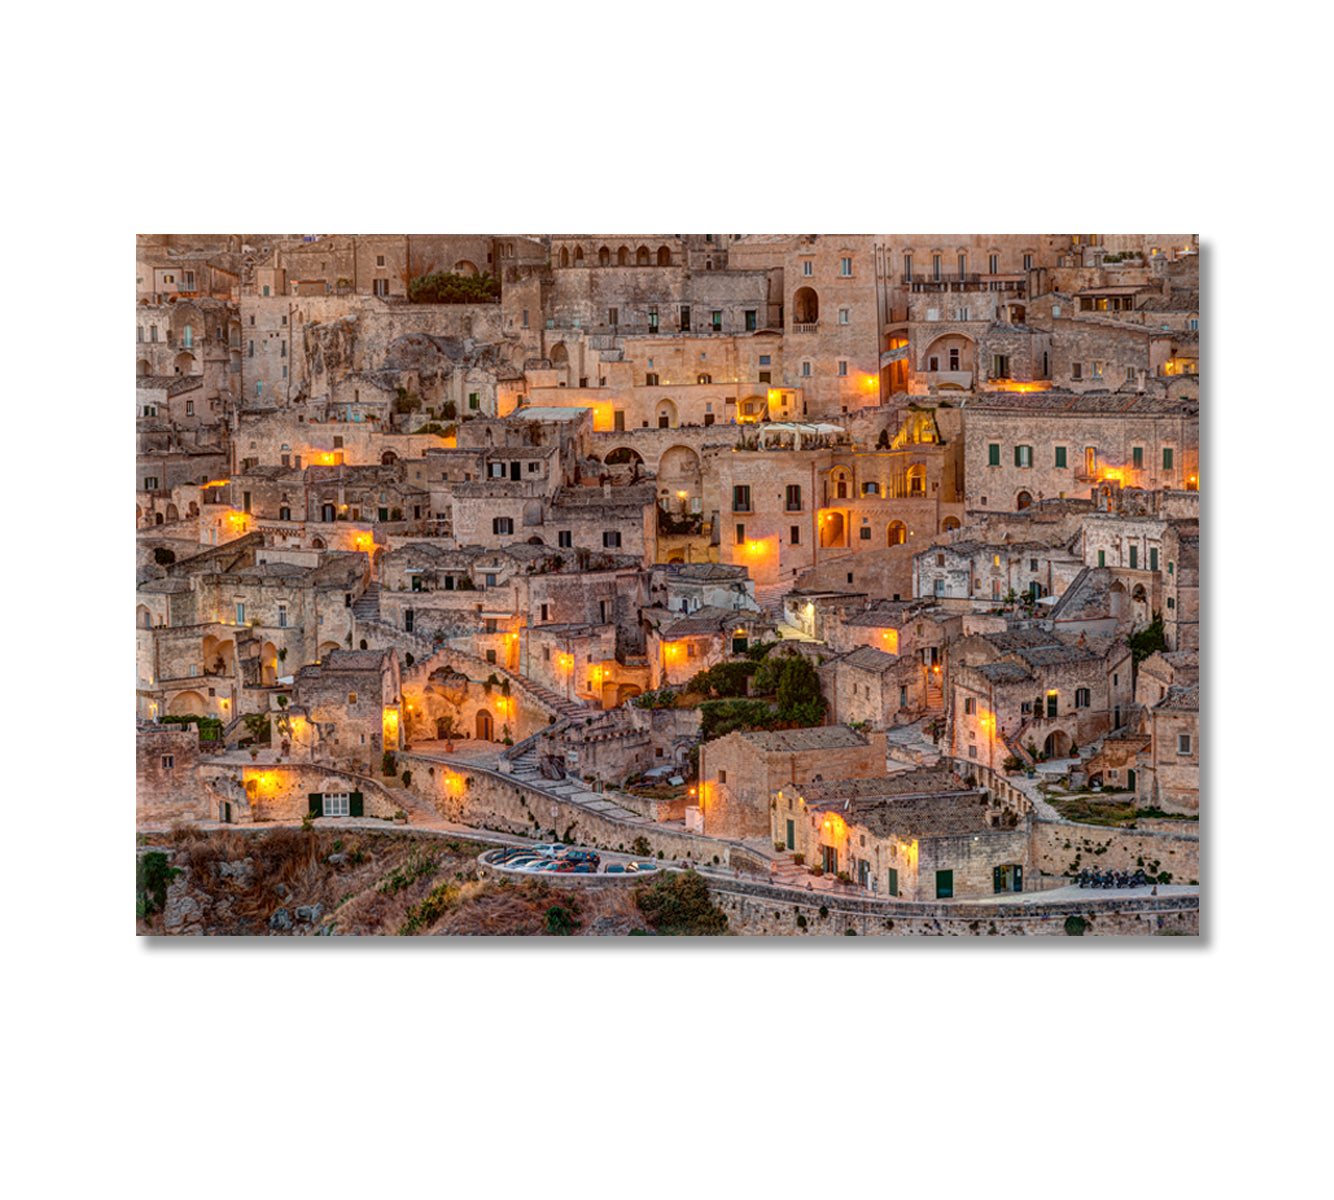 Old Town of Matera Italy Canvas Print-Canvas Print-CetArt-1 Panel-24x16 inches-CetArt